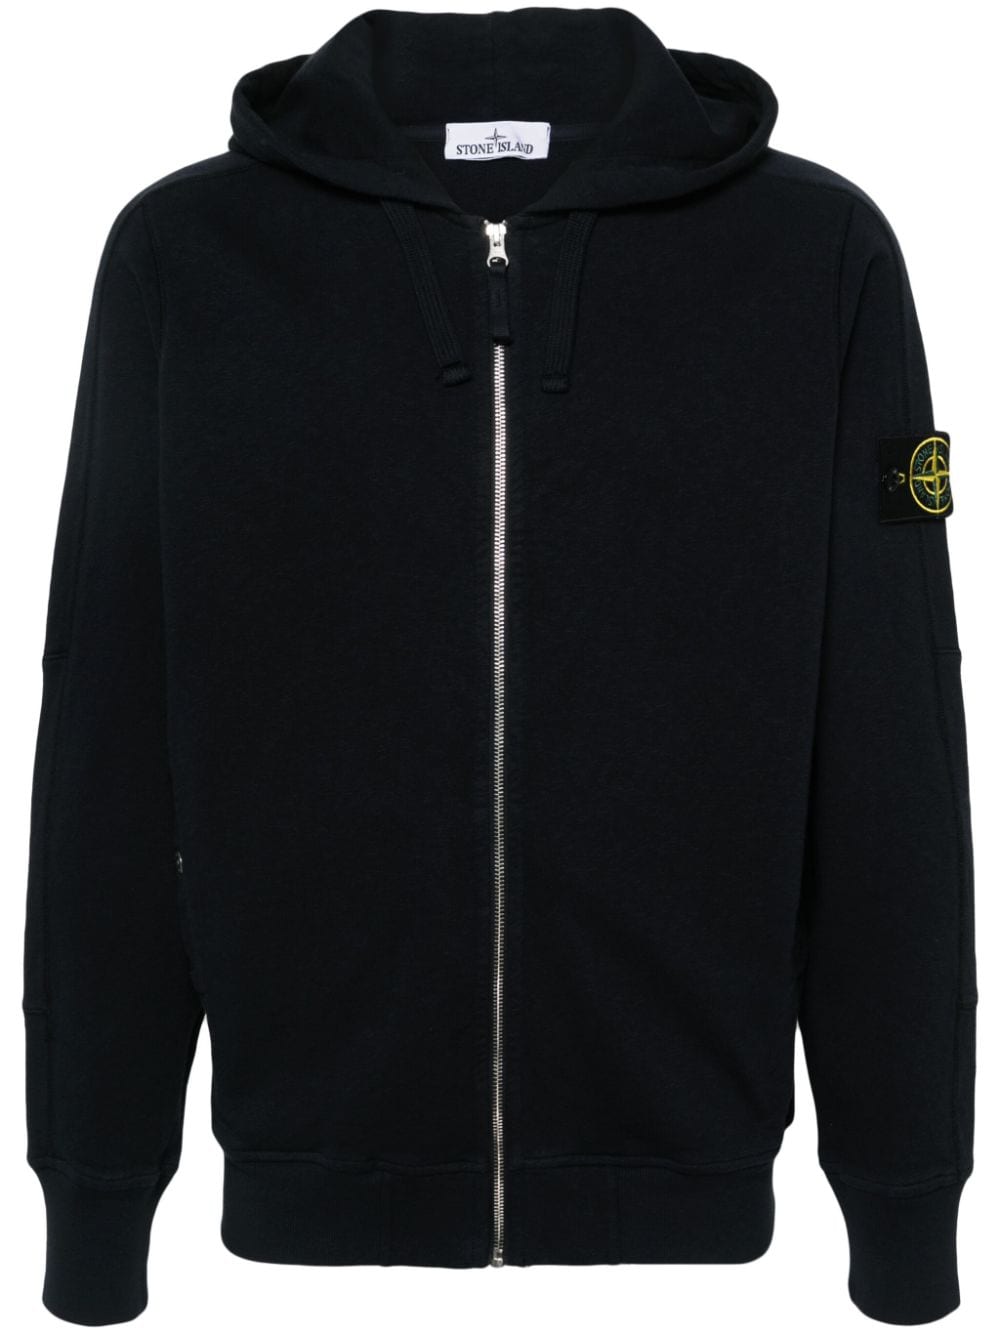 Compass cotton hoodie<BR/><BR/><BR/>